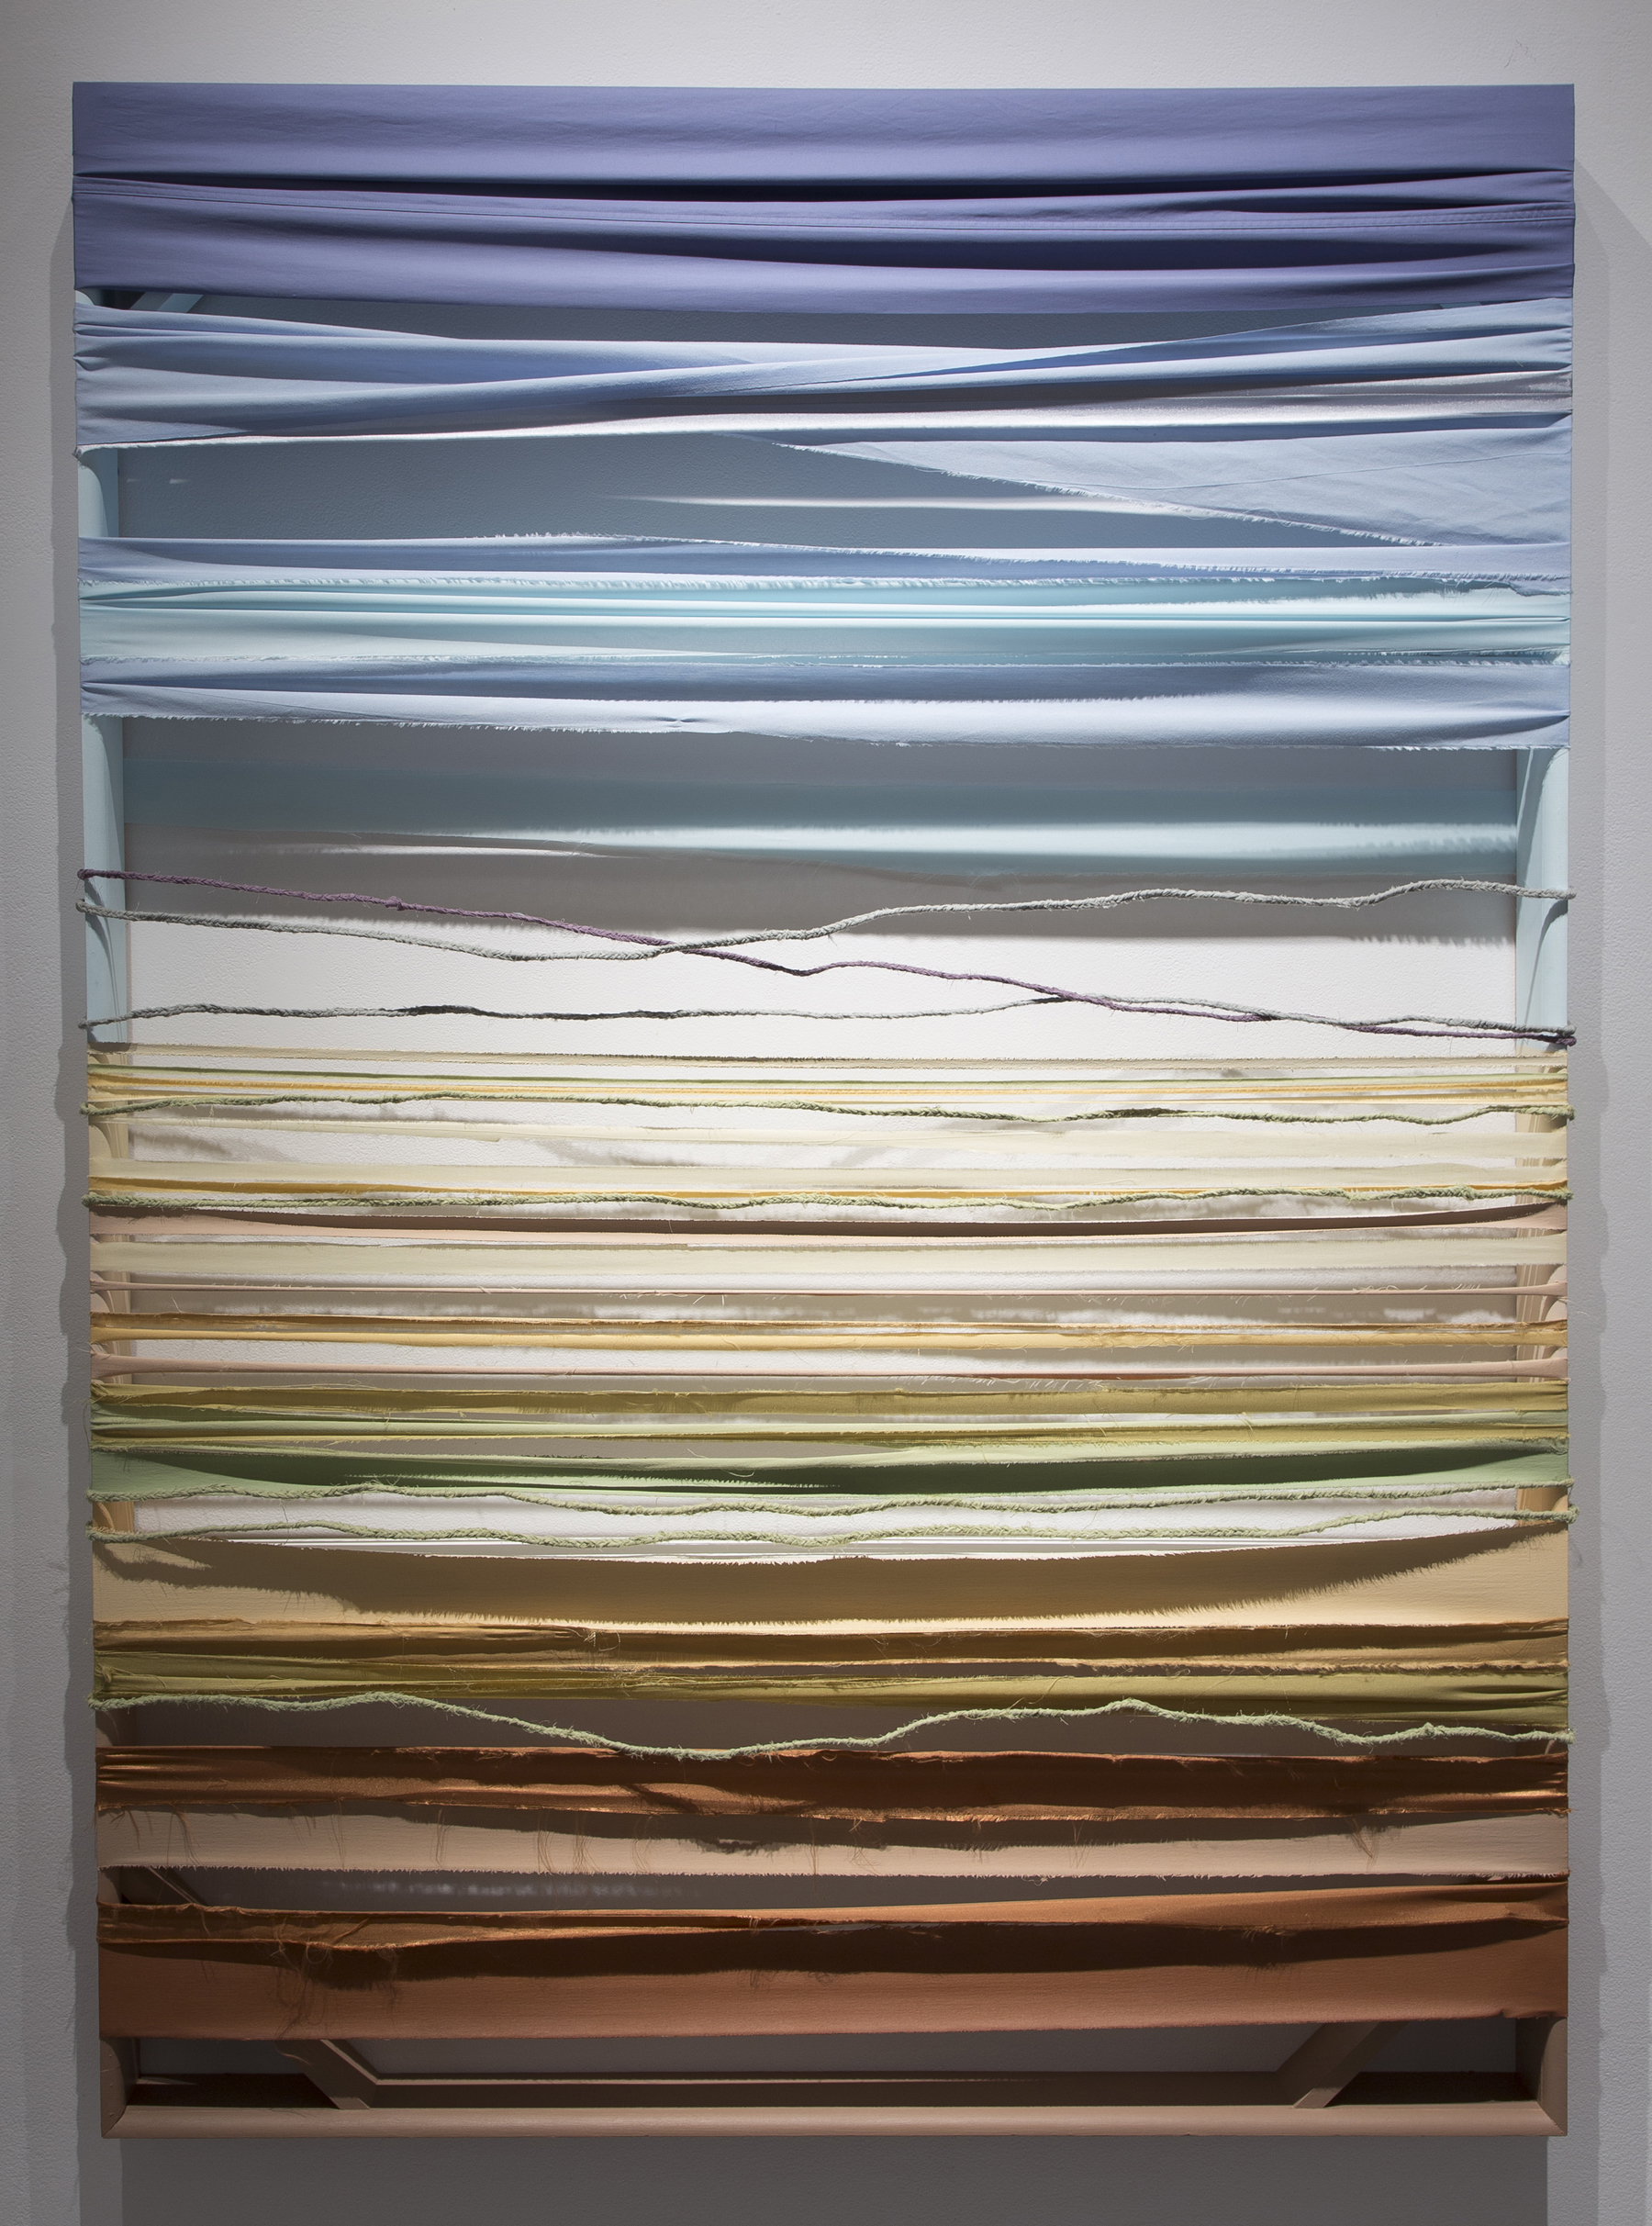   Seventy-Five x Fifty-Four  ( Double ). 2014  Bed linens, canvas, wire,&nbsp;painted wood  Photo credit:&nbsp;Checko Salgado / Focalchrome 